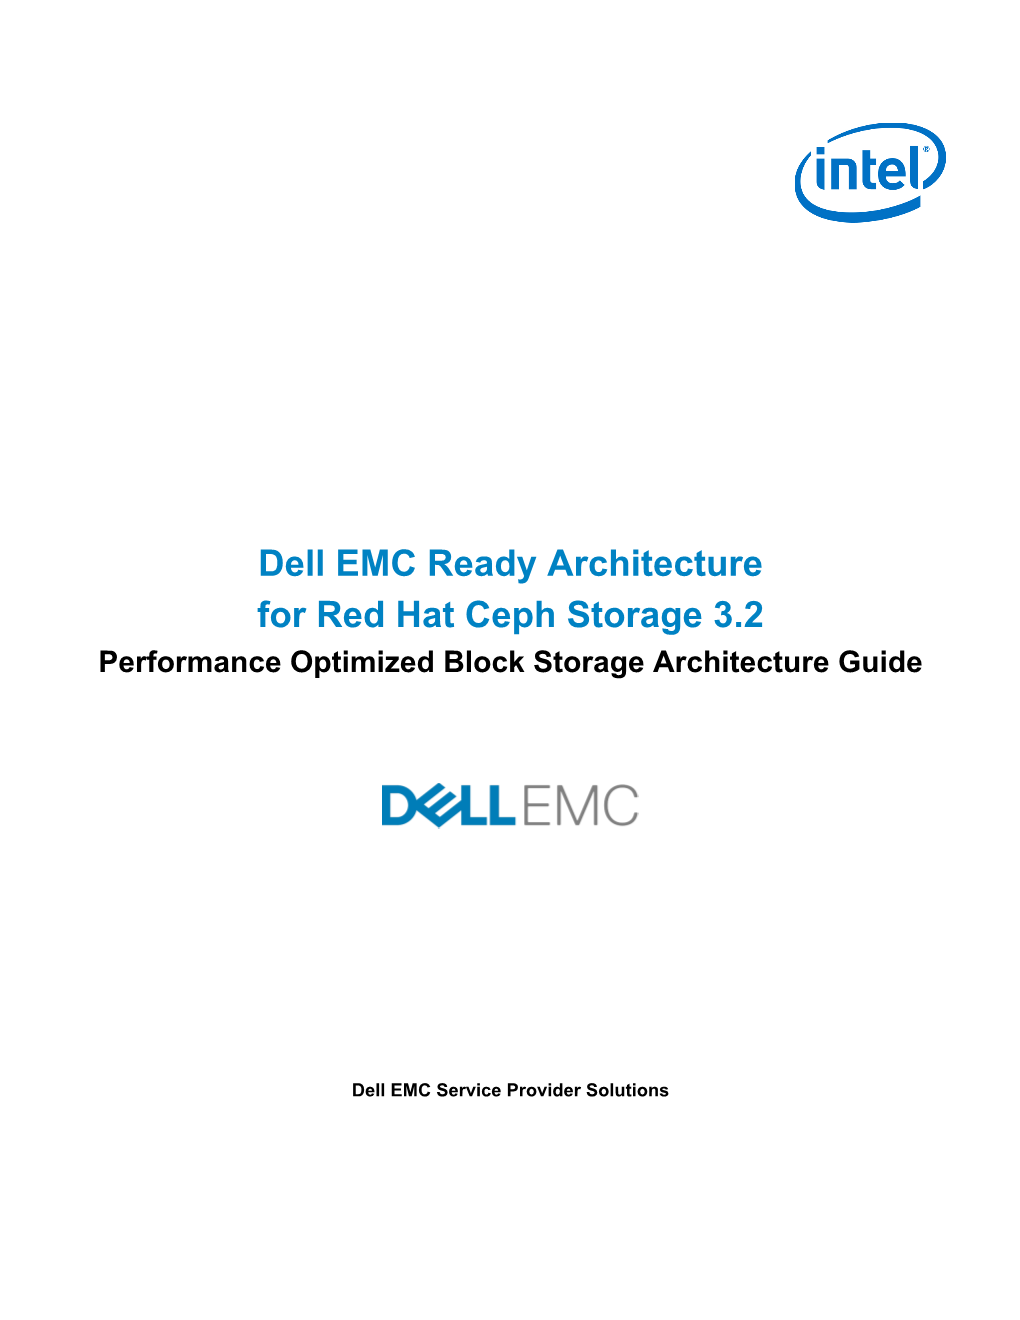 Dell EMC Ready Architecture for Red Hat Ceph Storage 3.2 Performance Optimized Block Storage Architecture Guide